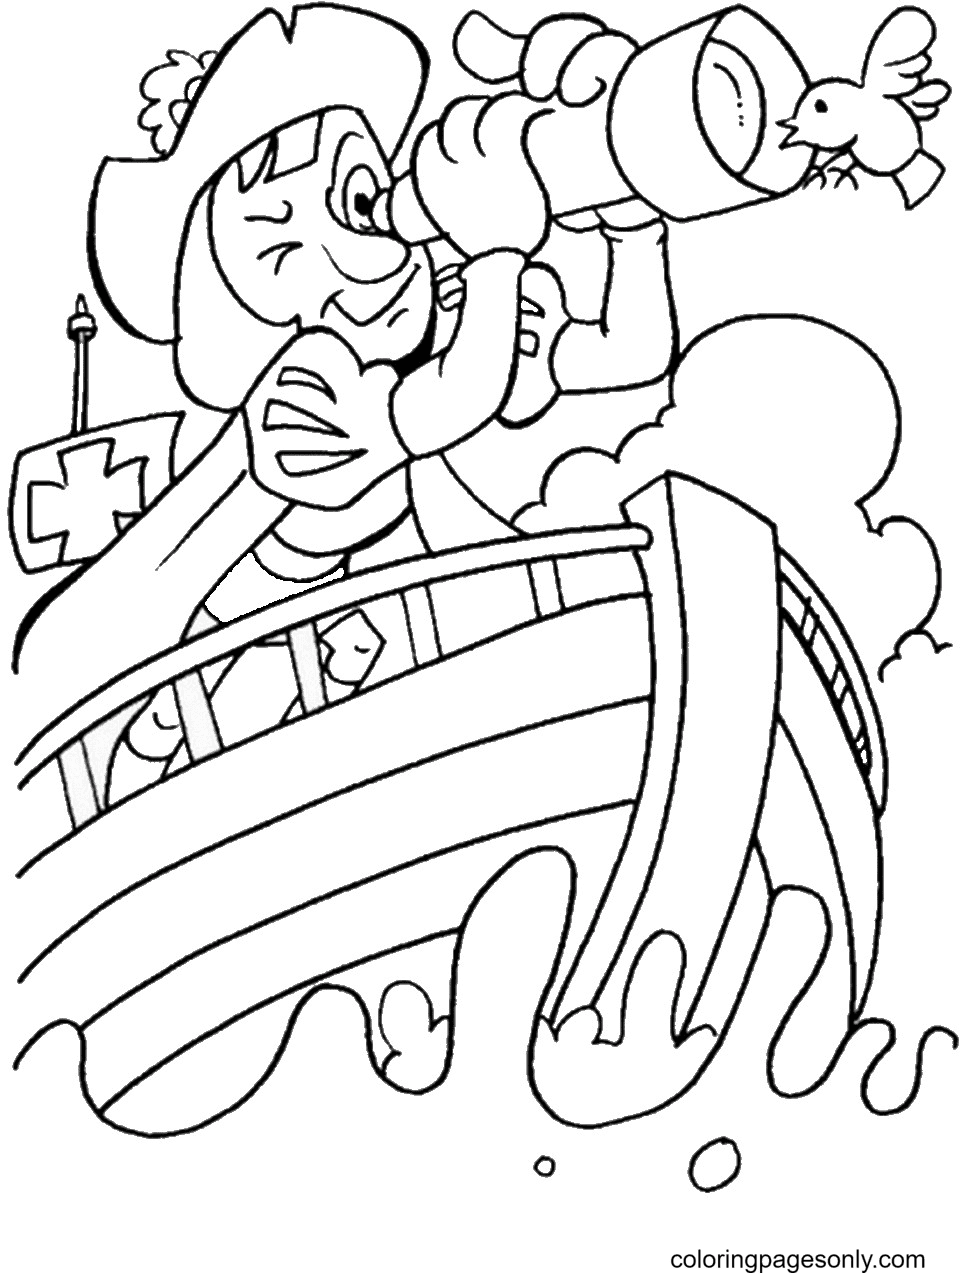 October Christopher Columbus Coloring Pages